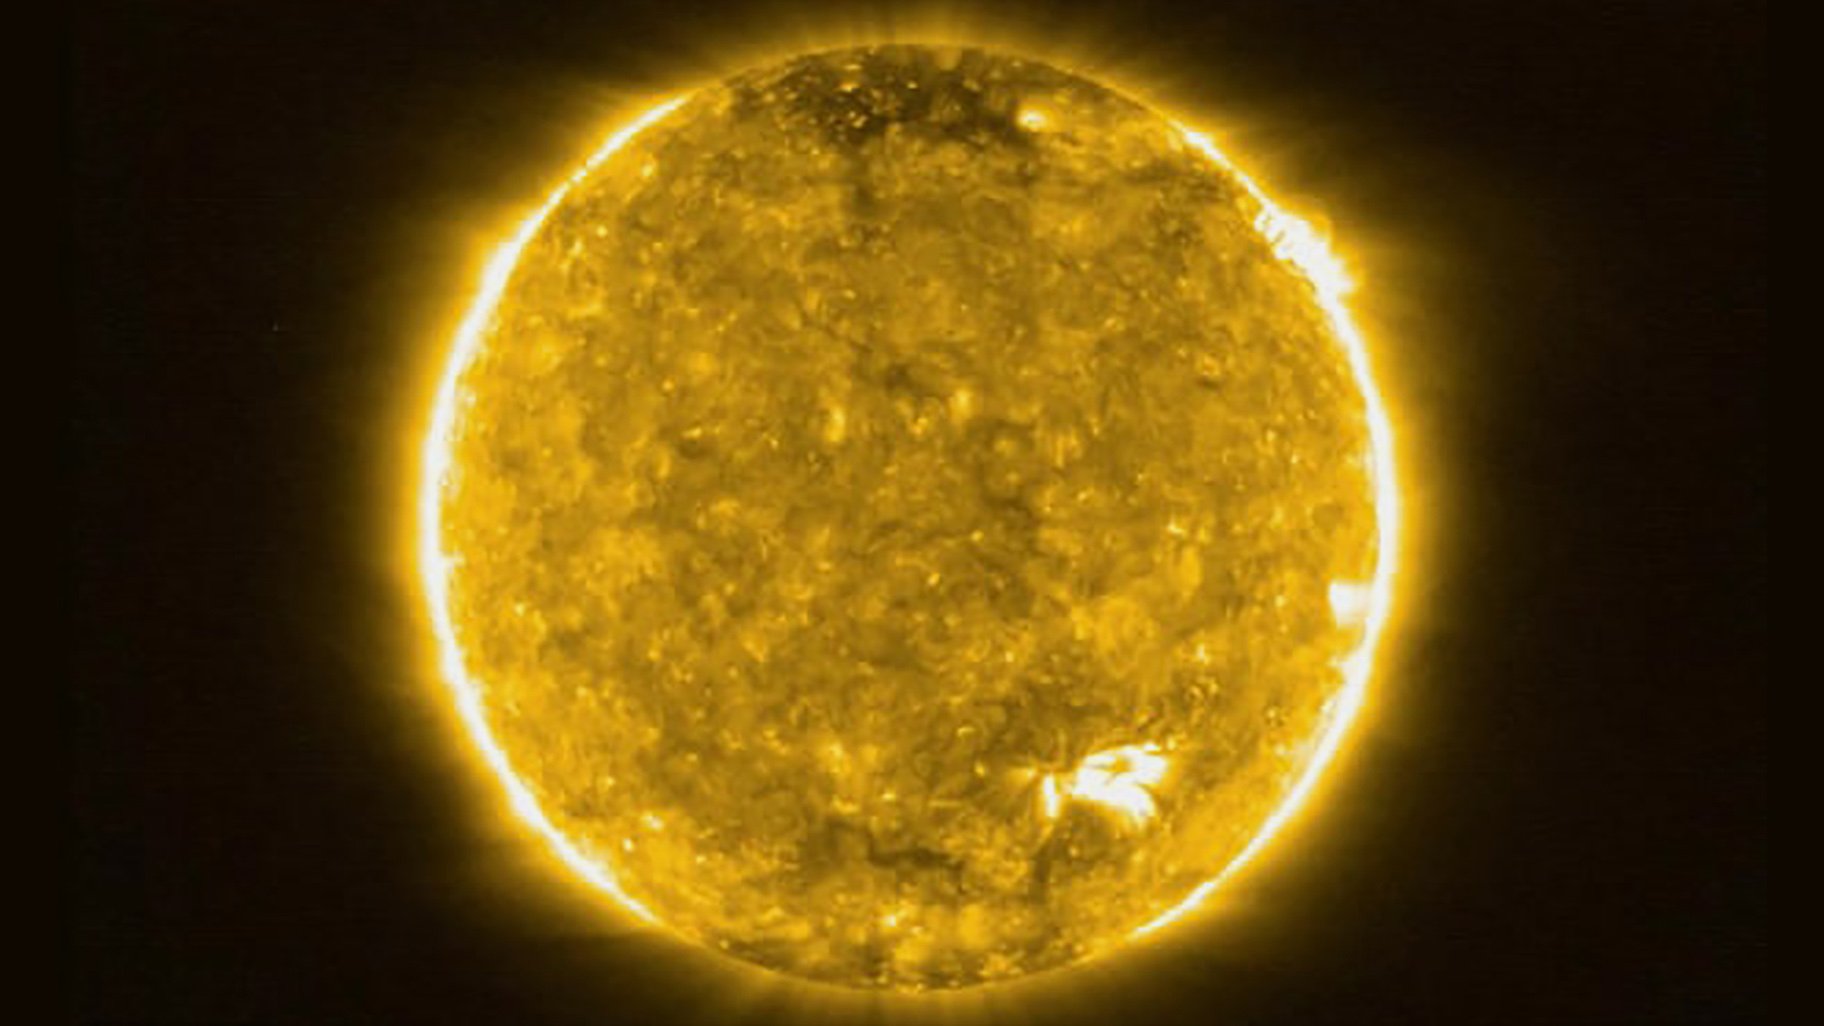 New Solar Orbiter Snaps Closest Pictures Ever Taken of the Sun